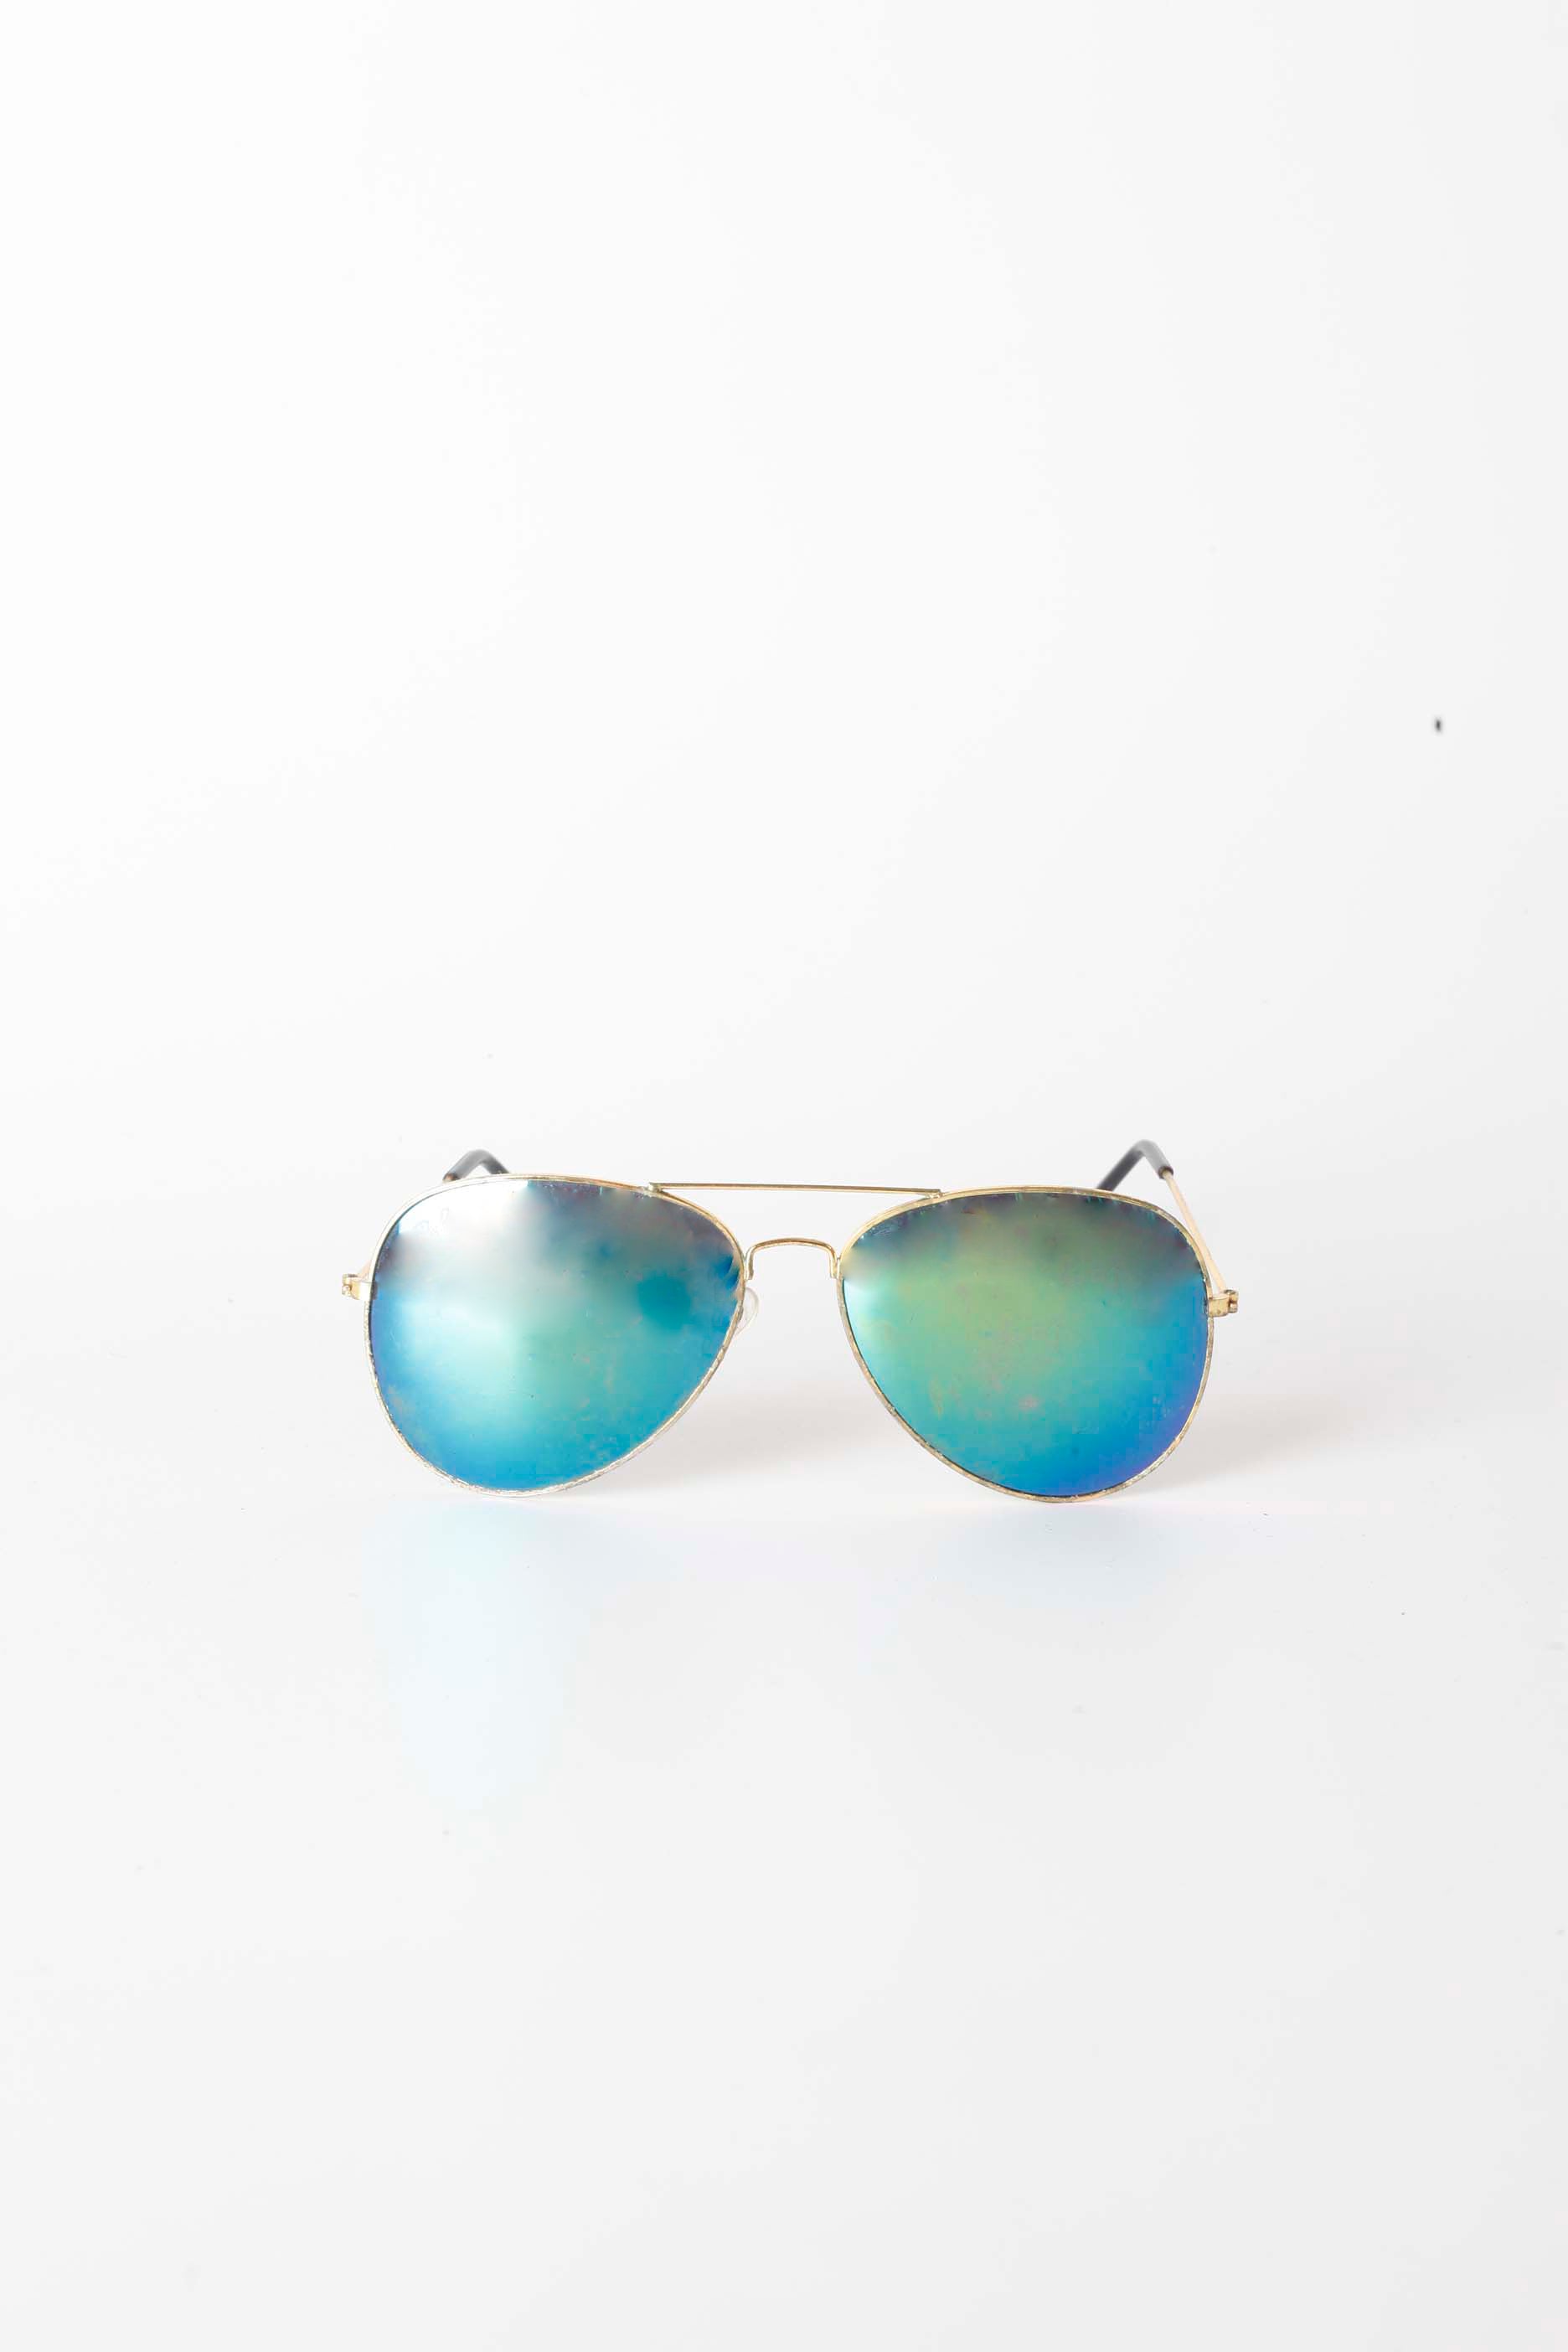 Gold Aviator Sunglasses with Blue Tint